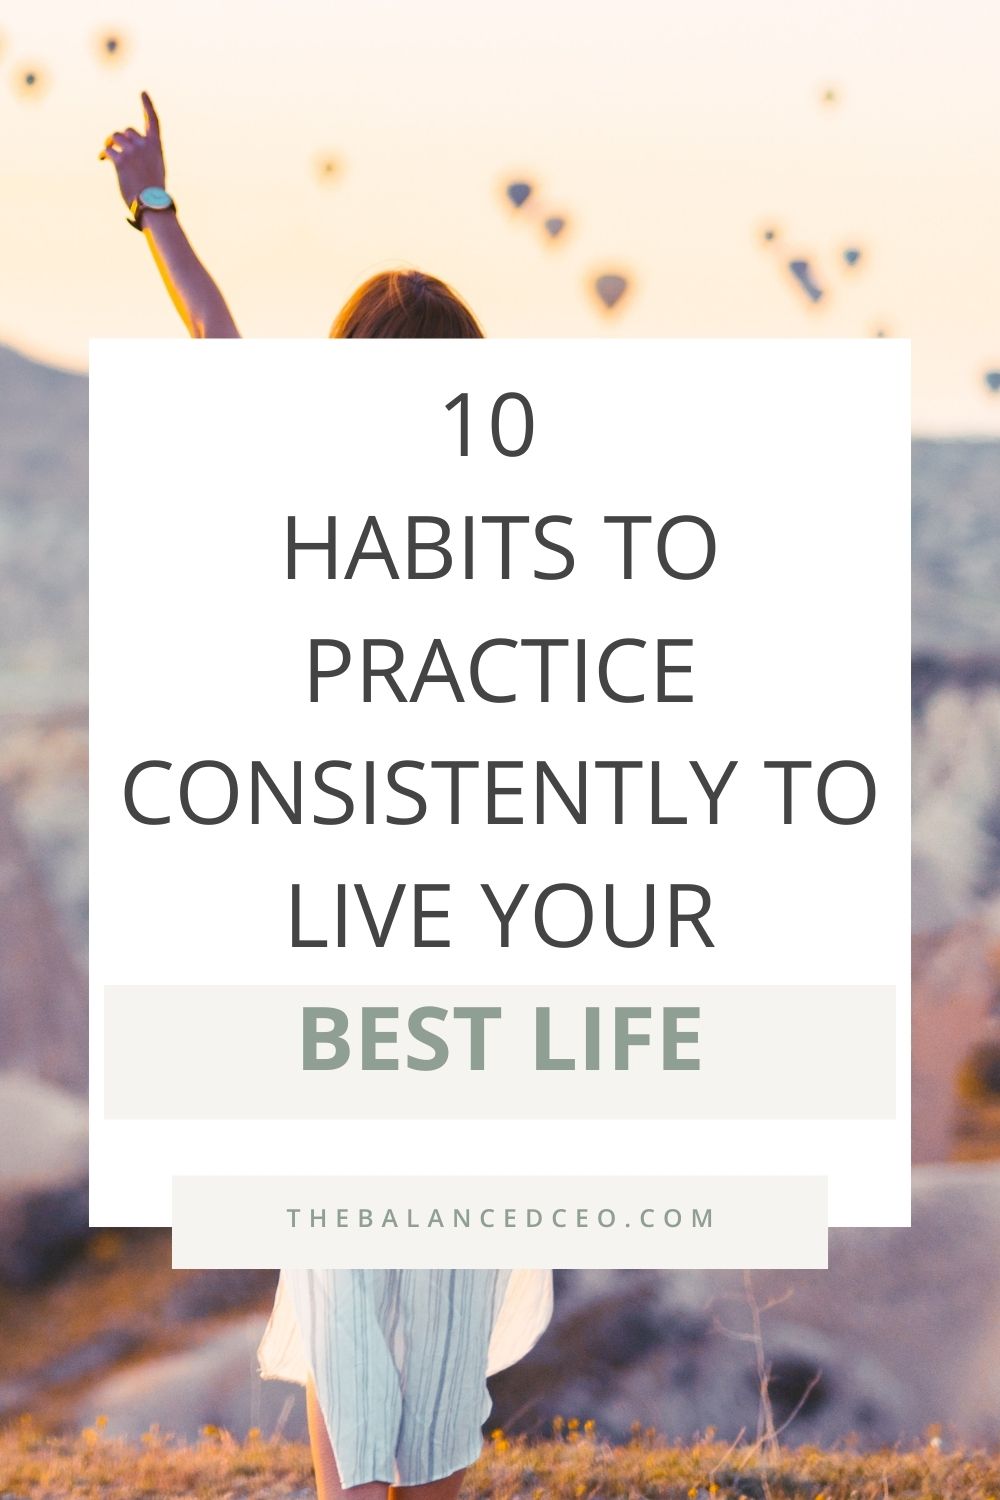 10 Habits to Practice Consistently to Live Your Best Life